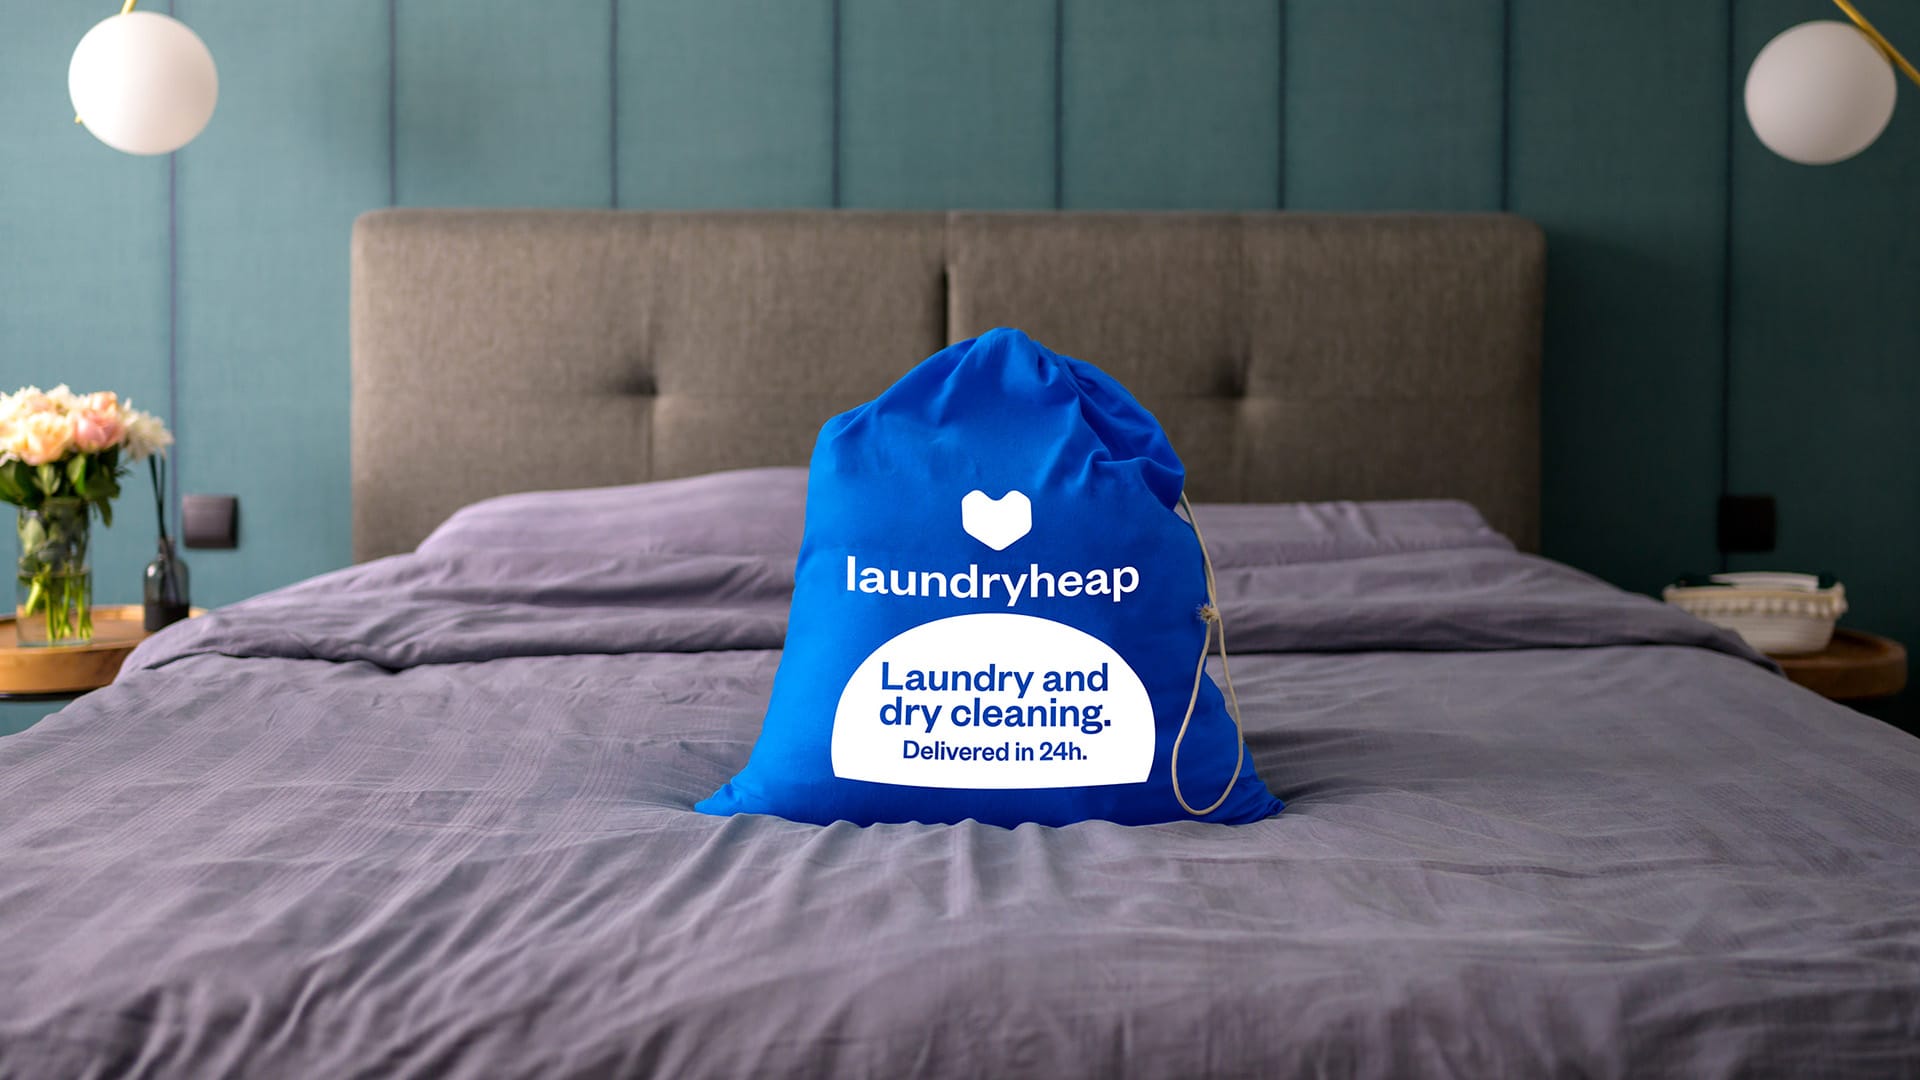 Laundryheap: 5x increase in applicant volume and 3x increase in recruiter productivity